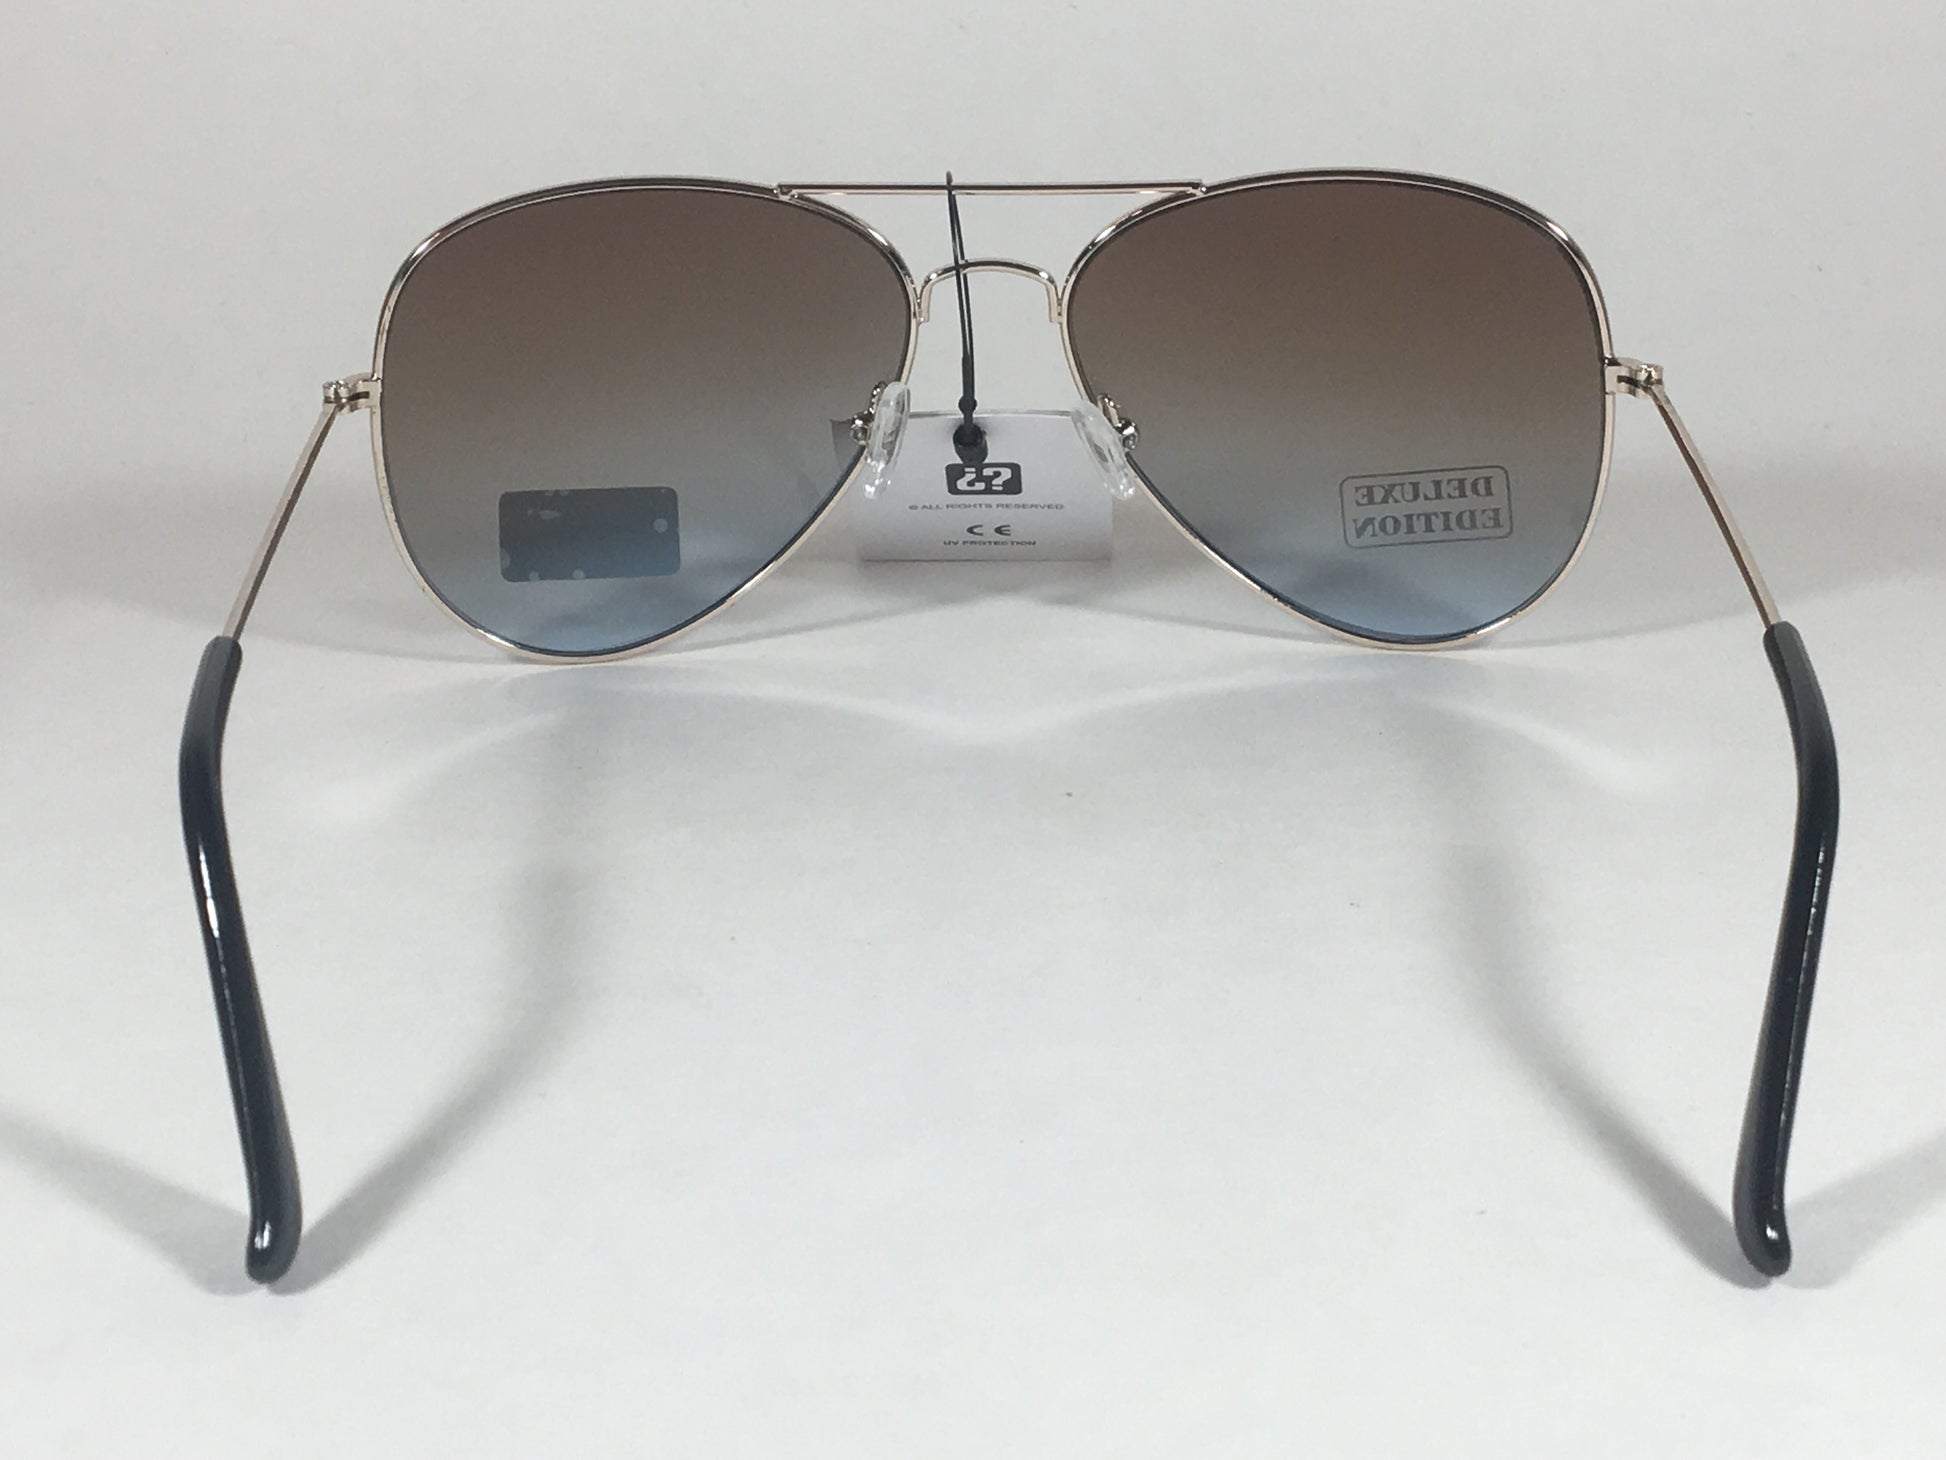 Air Force Top Ace Aviator Sunglasses Copper Gold Wire Metal Brown Blue Gradient - Sunglasses